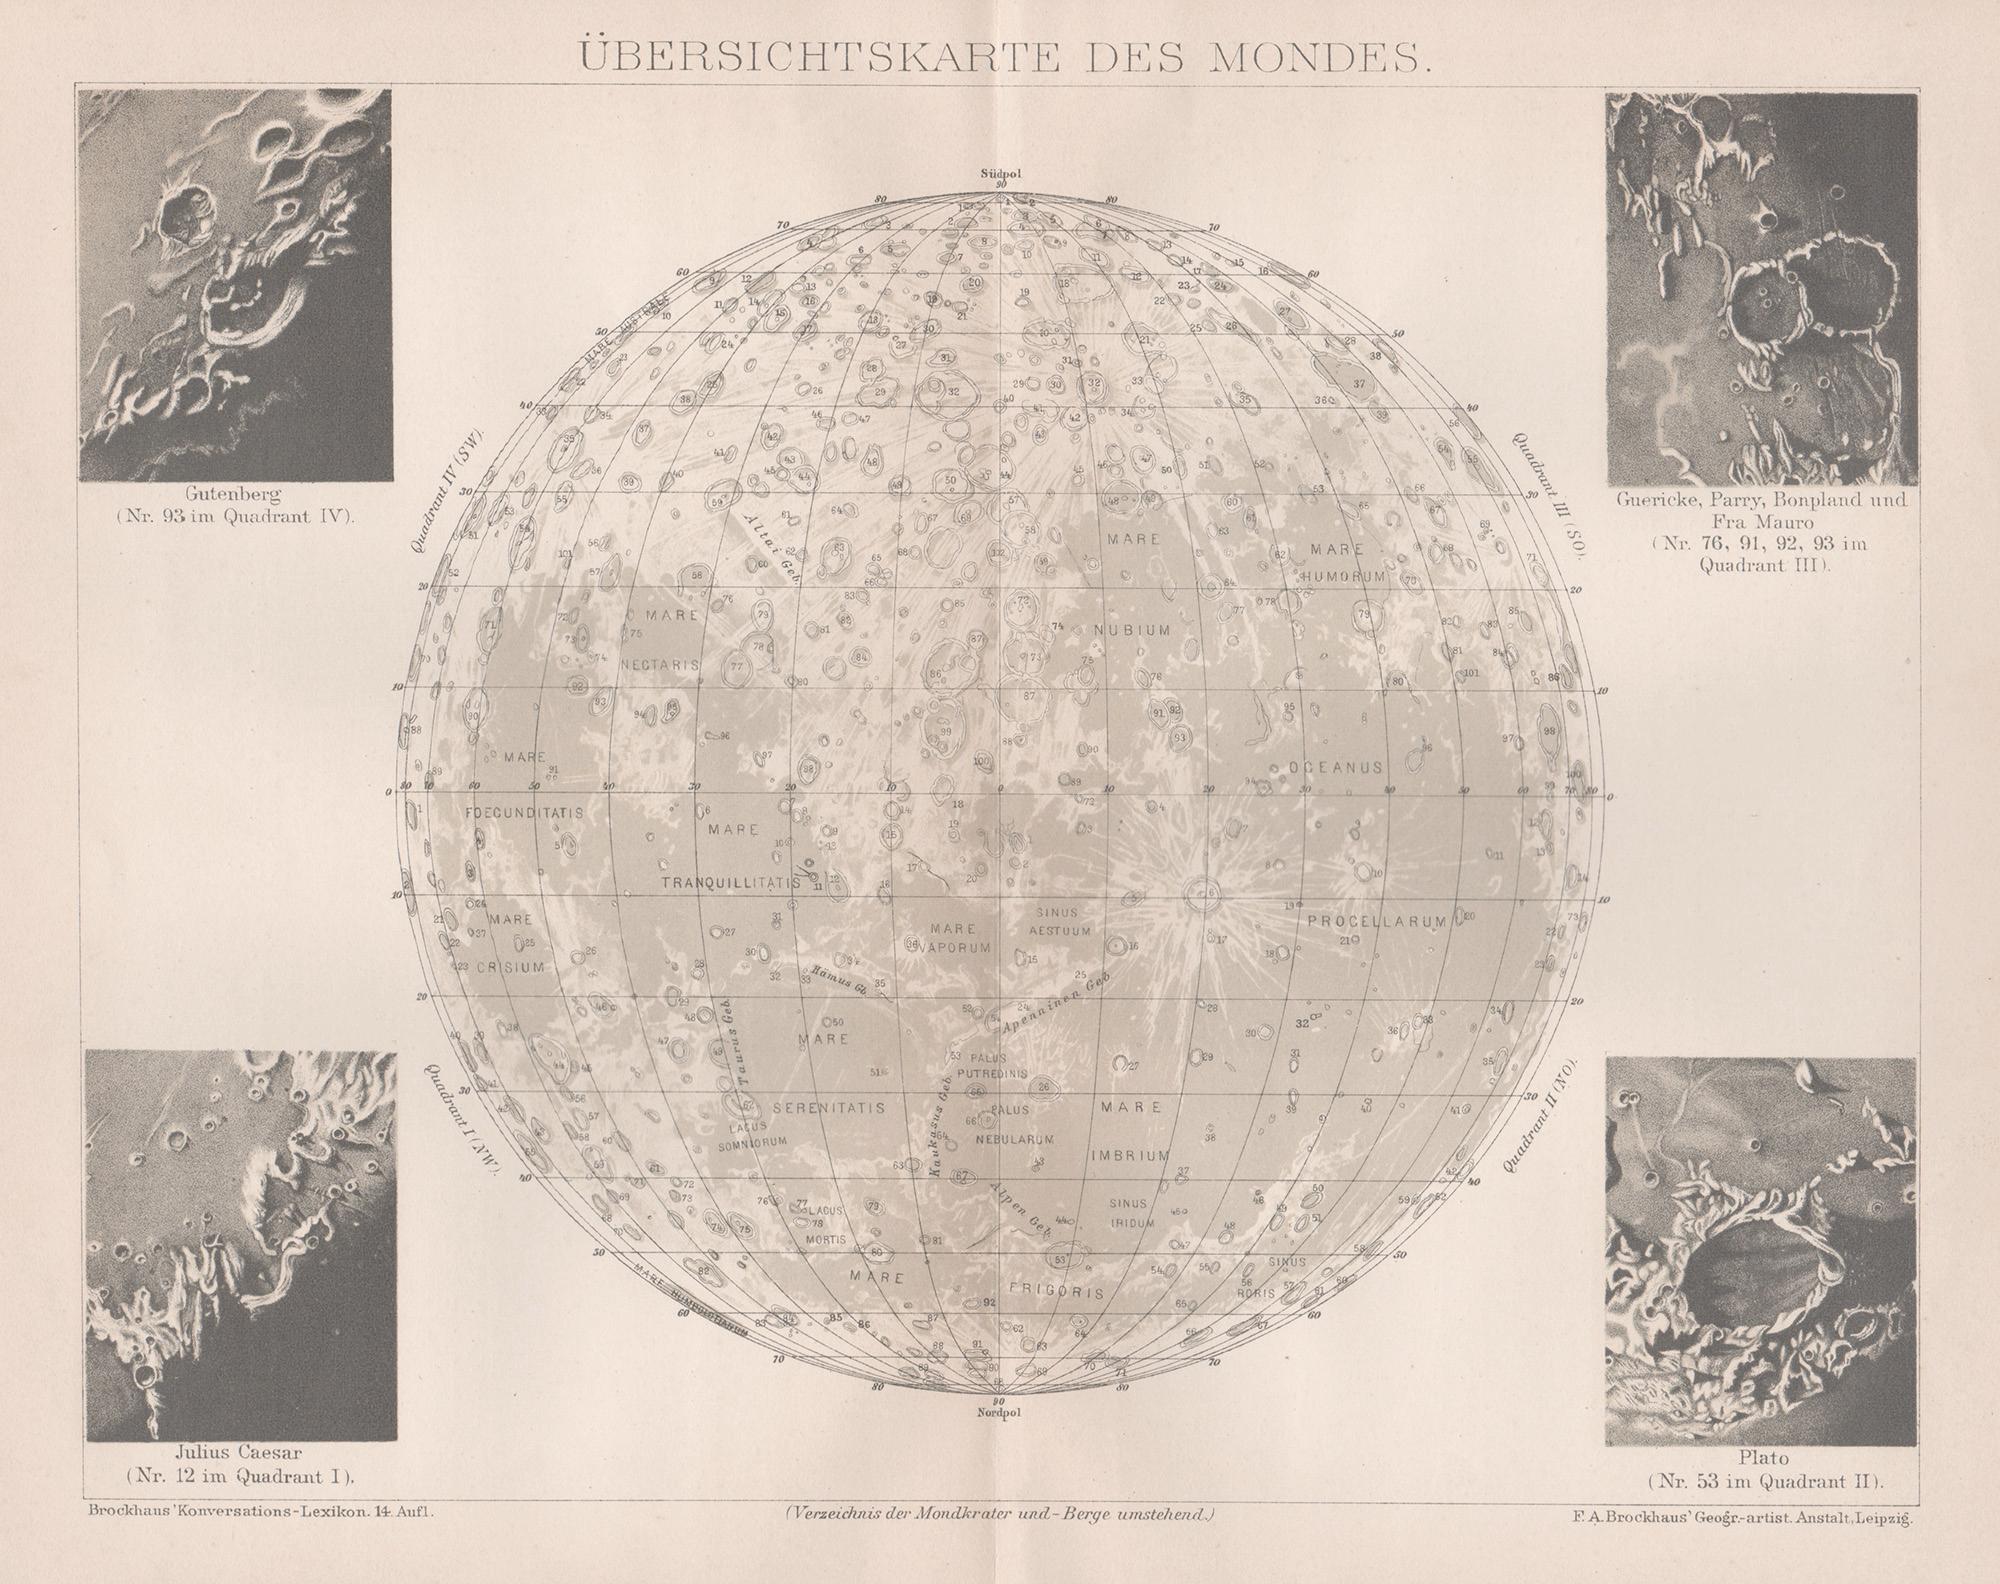 Unknown Still-Life Print - Ubersichtskarte Des Mondes (Overview Map of the Moon), antique astronomy print